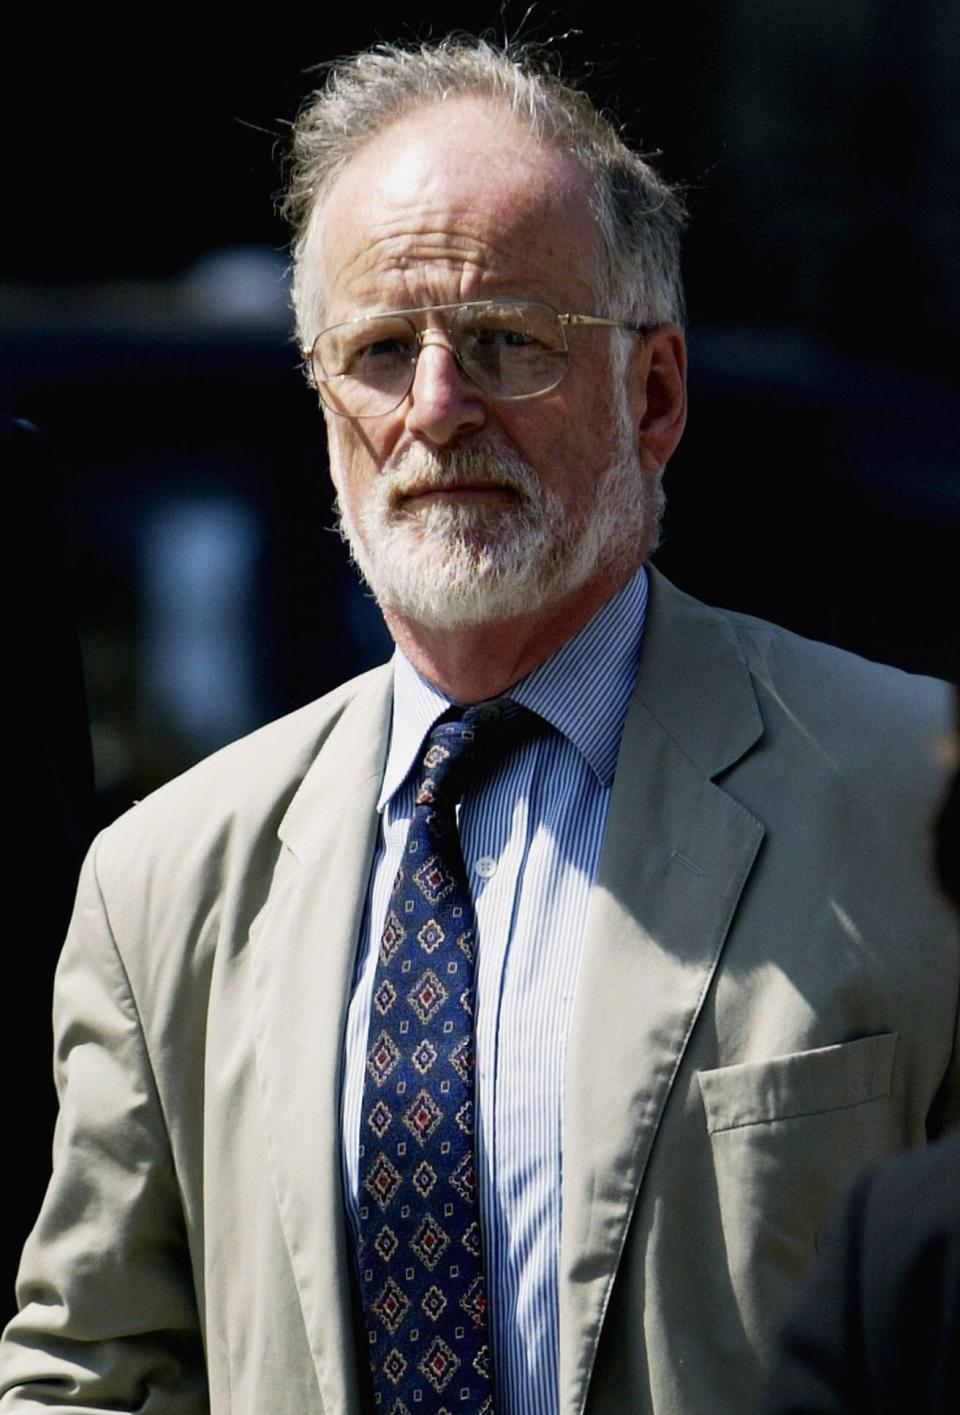 Dr David Kelly arriving at the House of Commons on July 15 2003. Two days later he was dead - Ian Waldie/ Getty Images